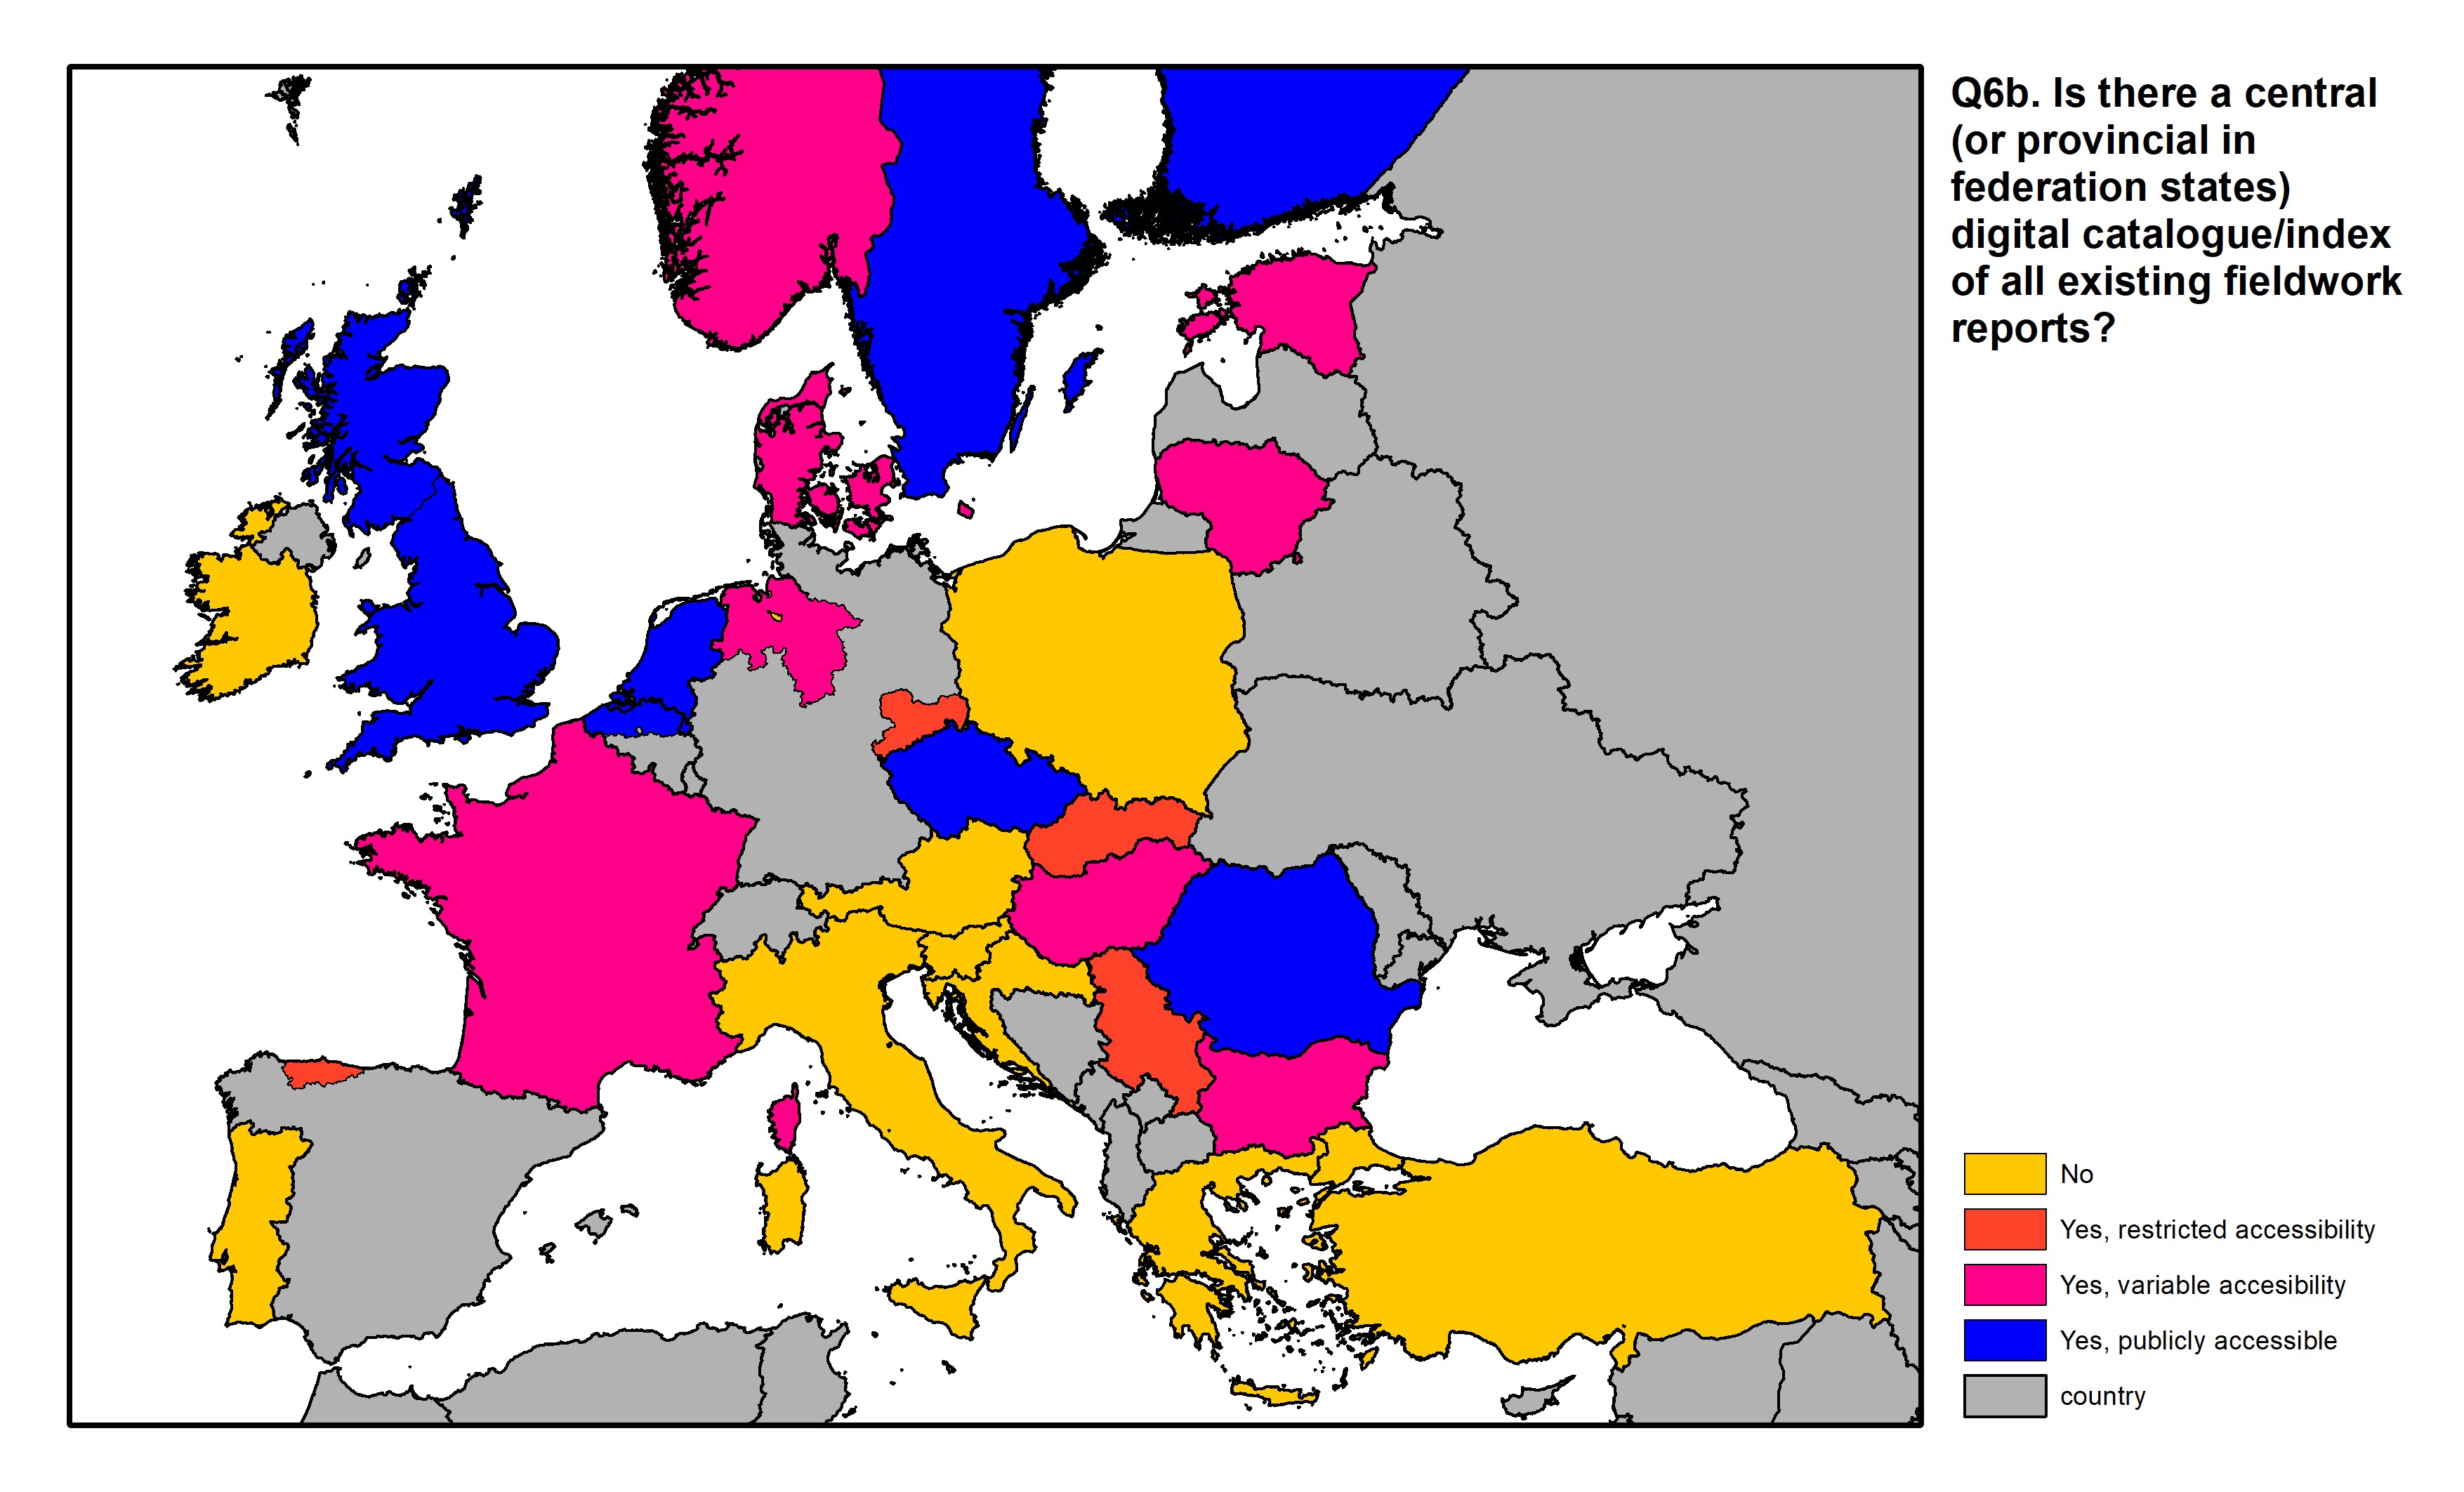 Figure 19: a map of Europe showing countries and regions in colour based on response rates to the survey question.